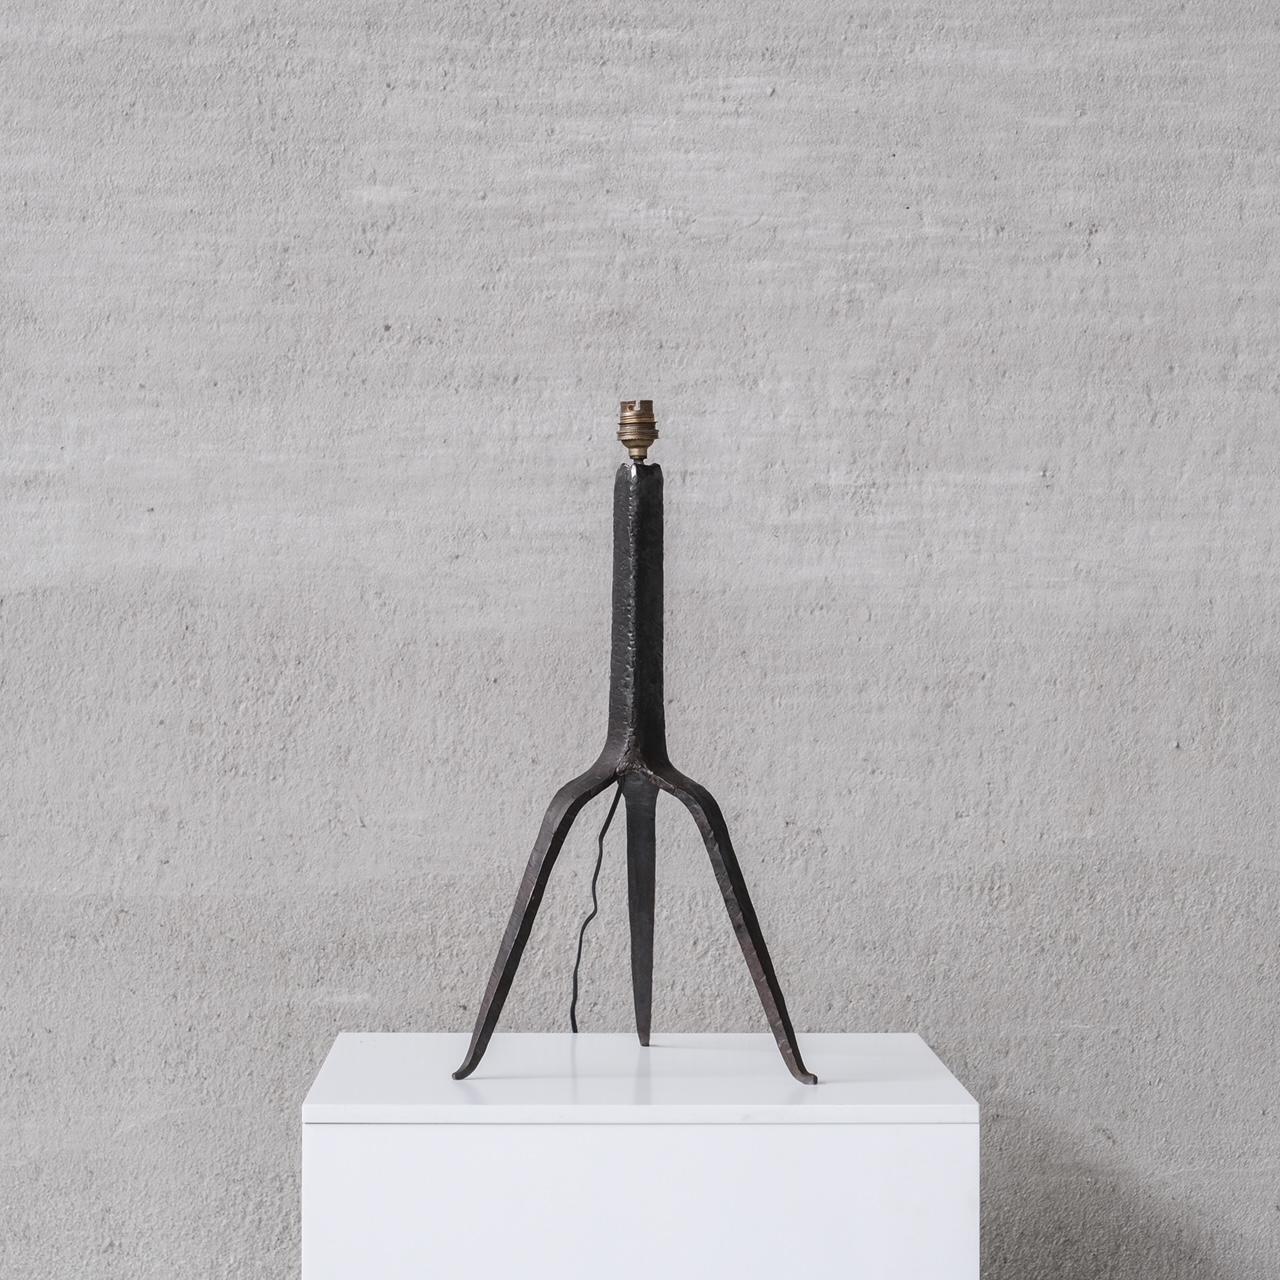 A forged iron table lamp. 

Signed to the underside of one leg. 

France, circa 1950s. 

Good quality, elegant form. 

Since re-wired and PAT tested. 

Location: Belgium Gallery. 

Dimensions: 49 H x 28 W x 26 D in cm. 

Delivery: